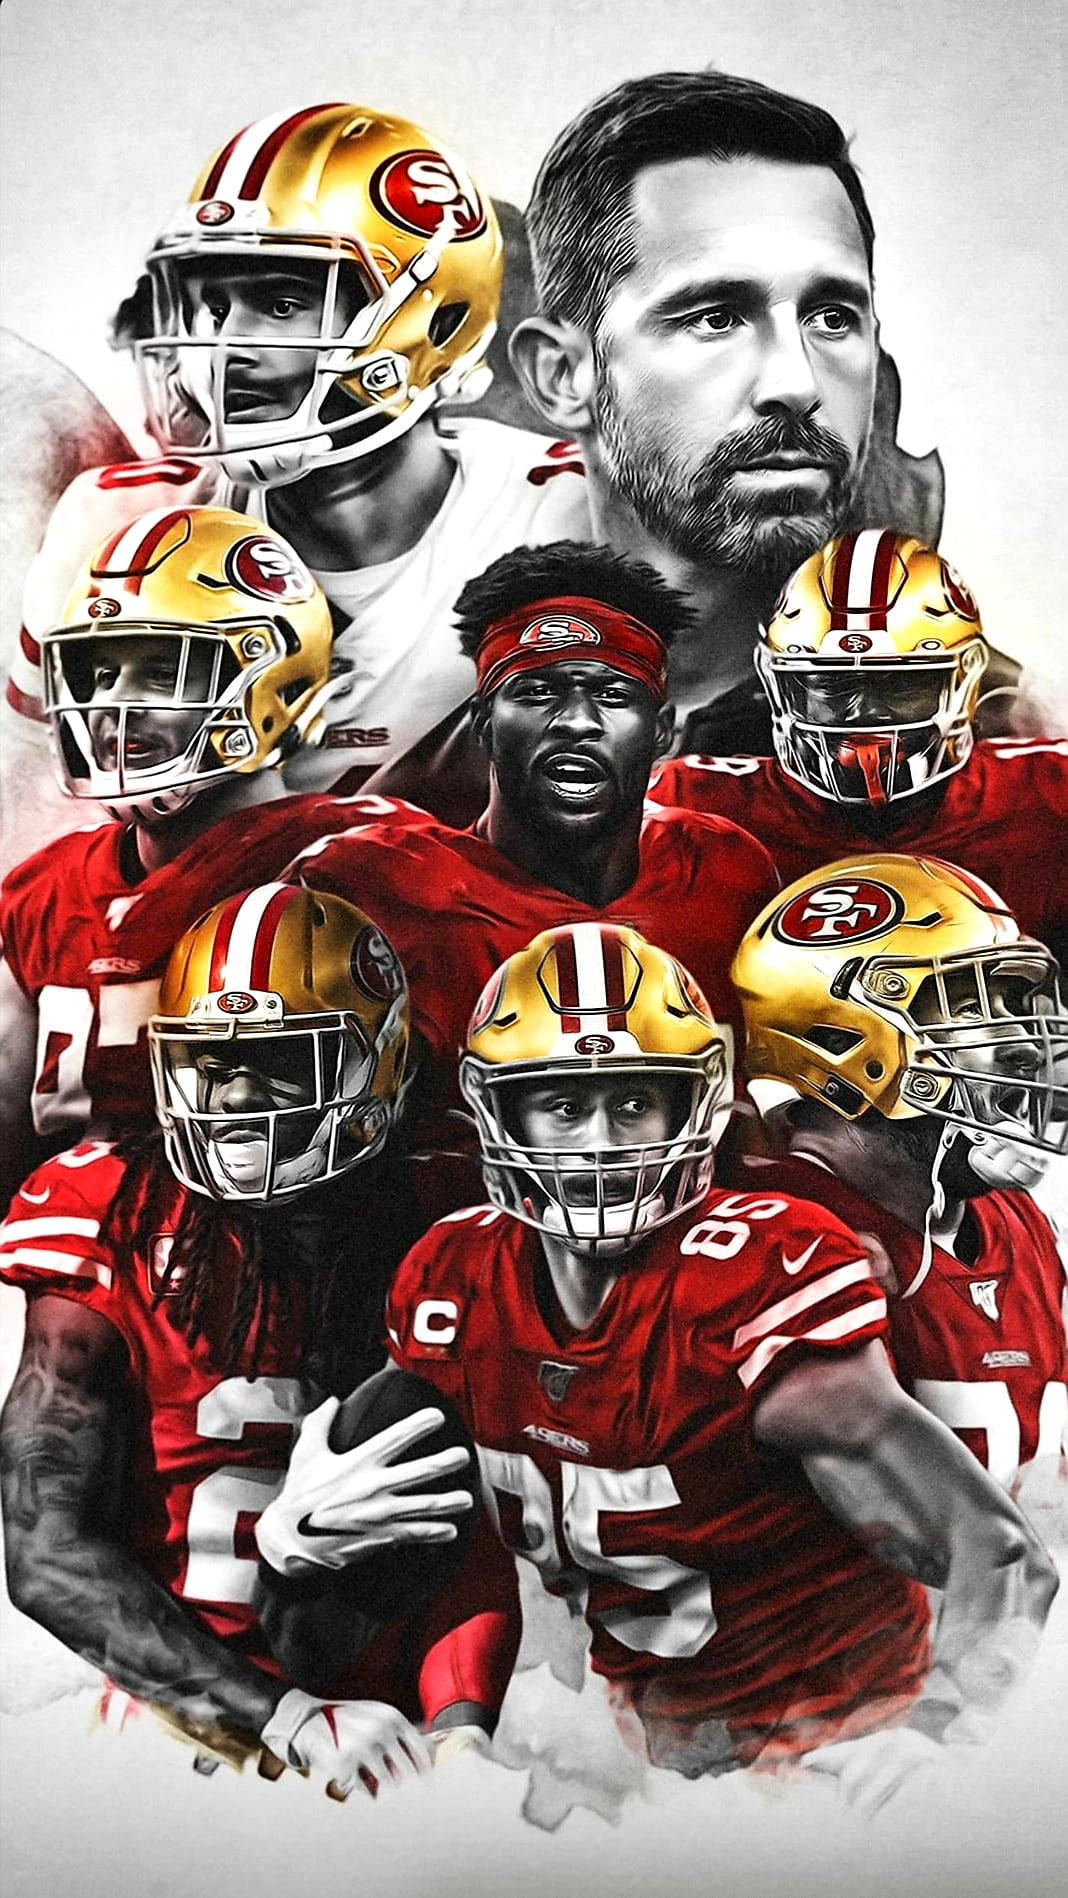 San Francisco Players Poster 49ers Iphone Wallpaper